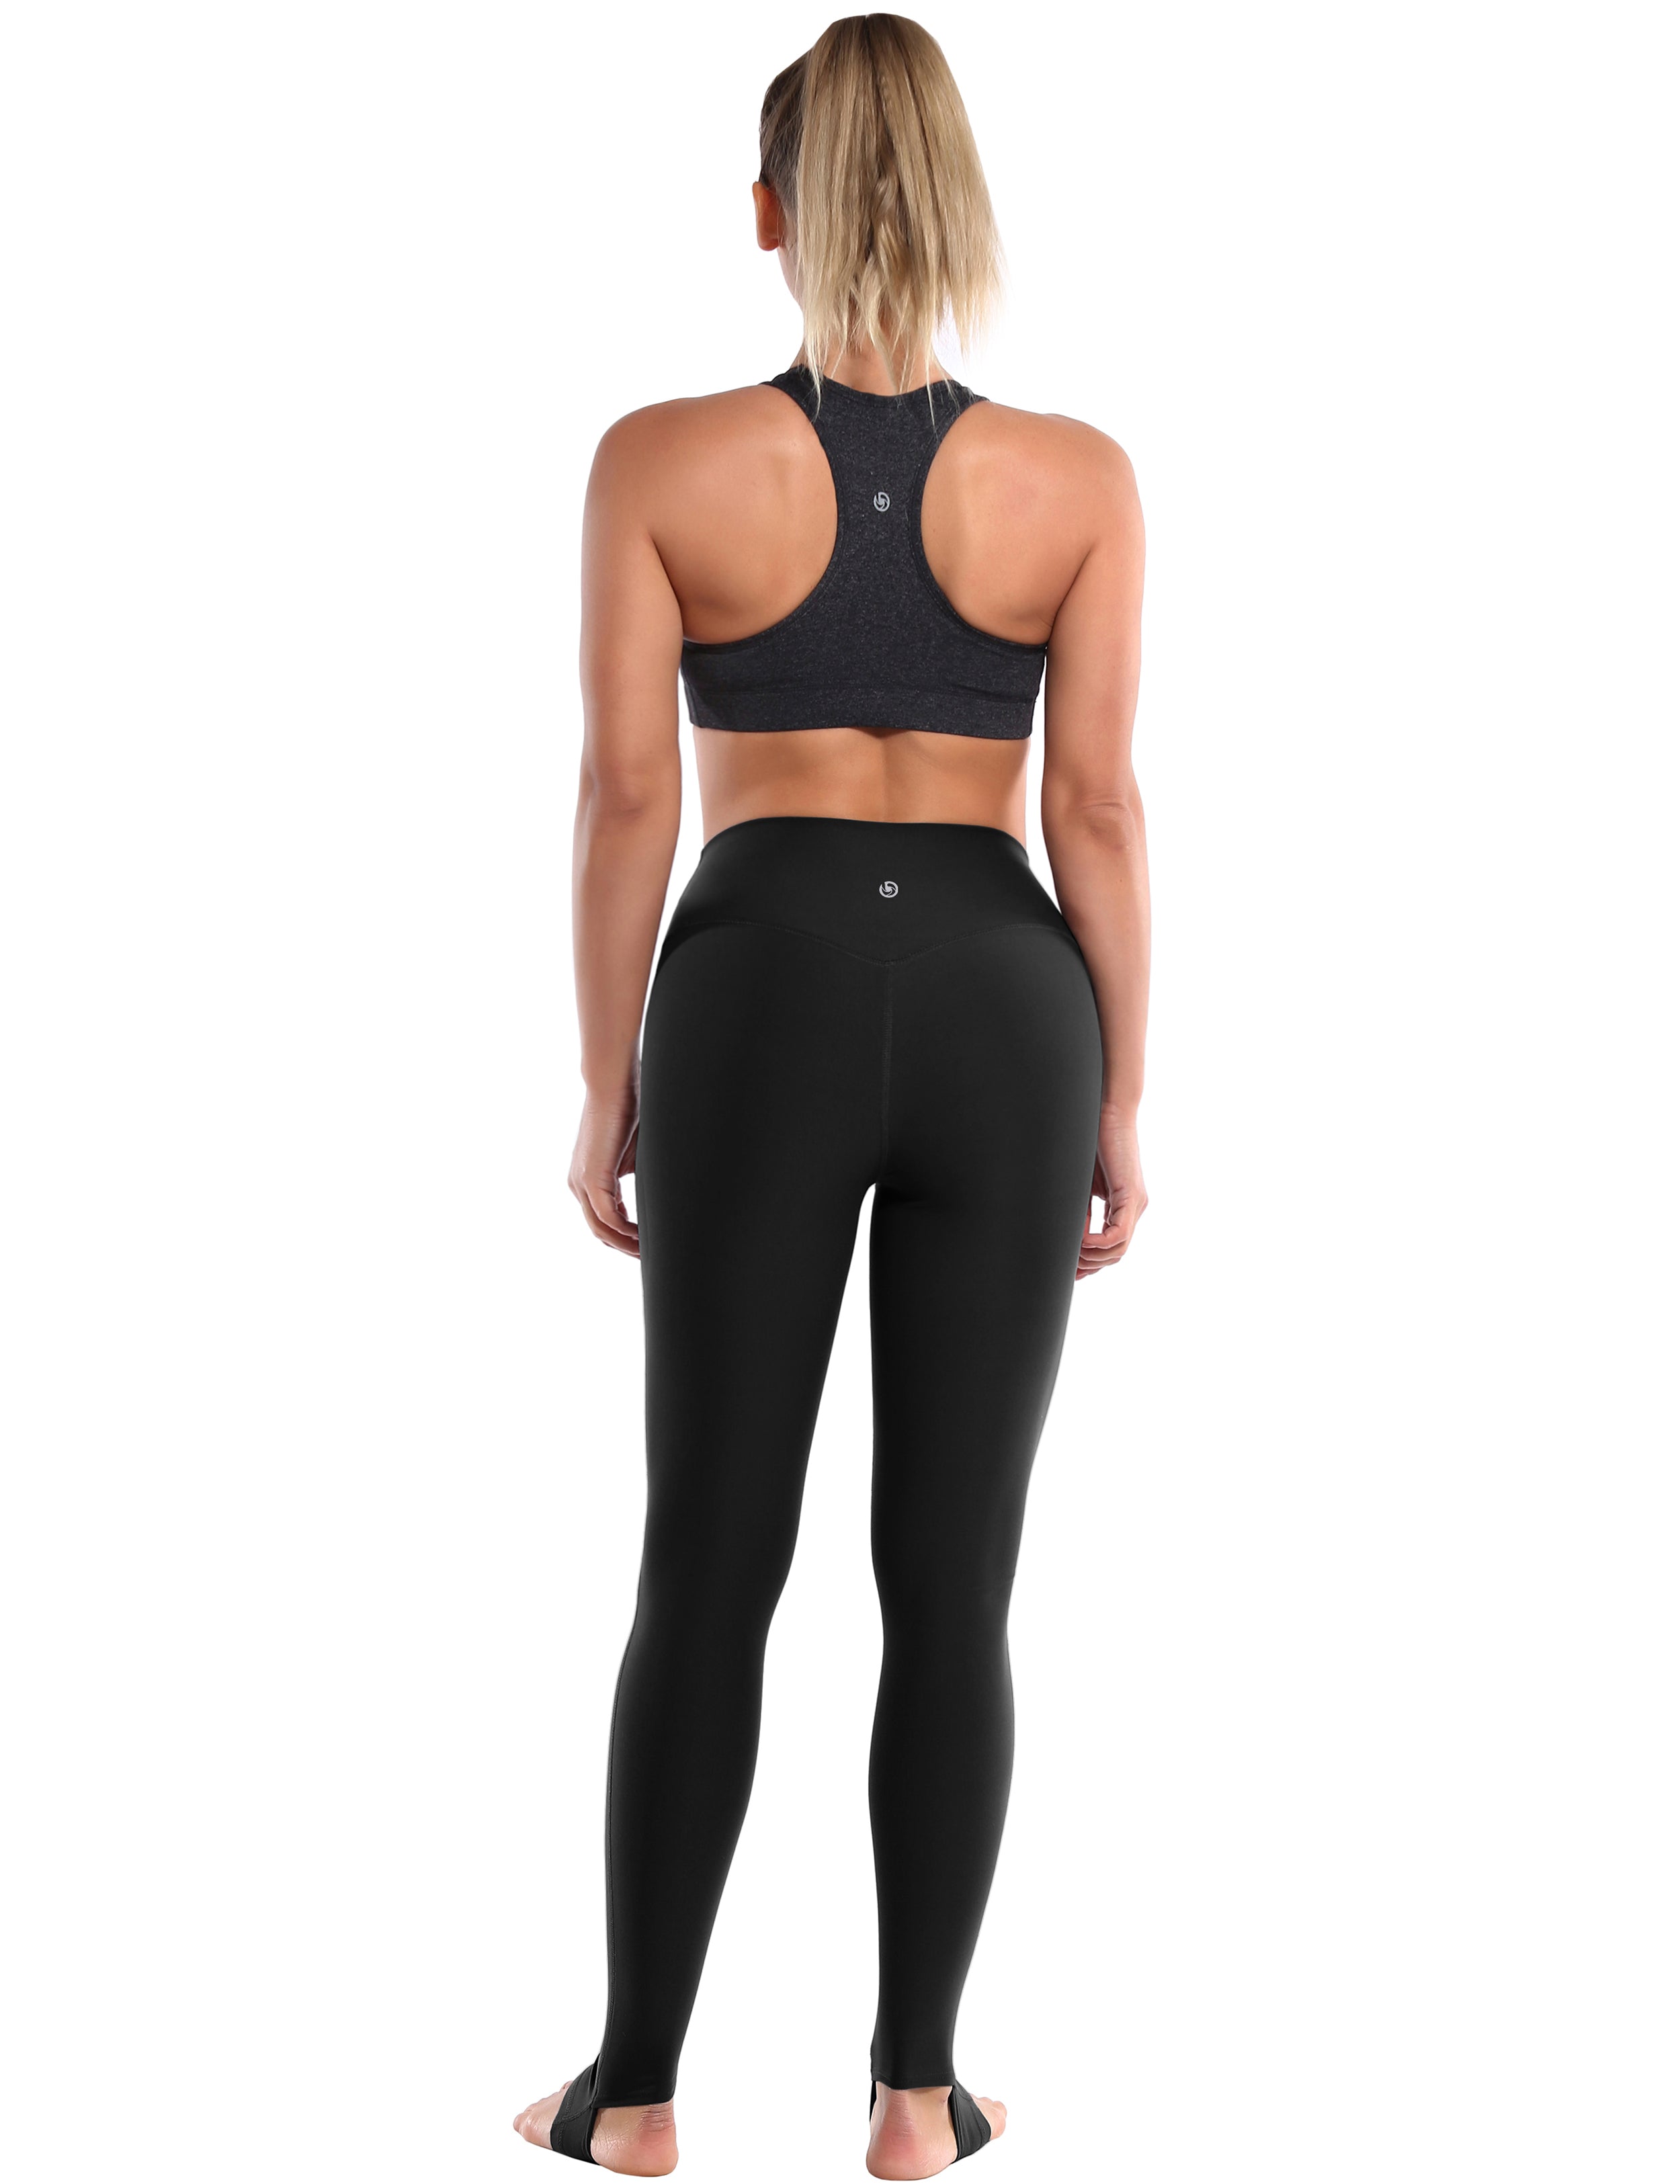 Over the Heel Pilates Pants black Over the Heel Design 87%Nylon/13%Spandex Fabric doesn't attract lint easily 4-way stretch No see-through Moisture-wicking Tummy control